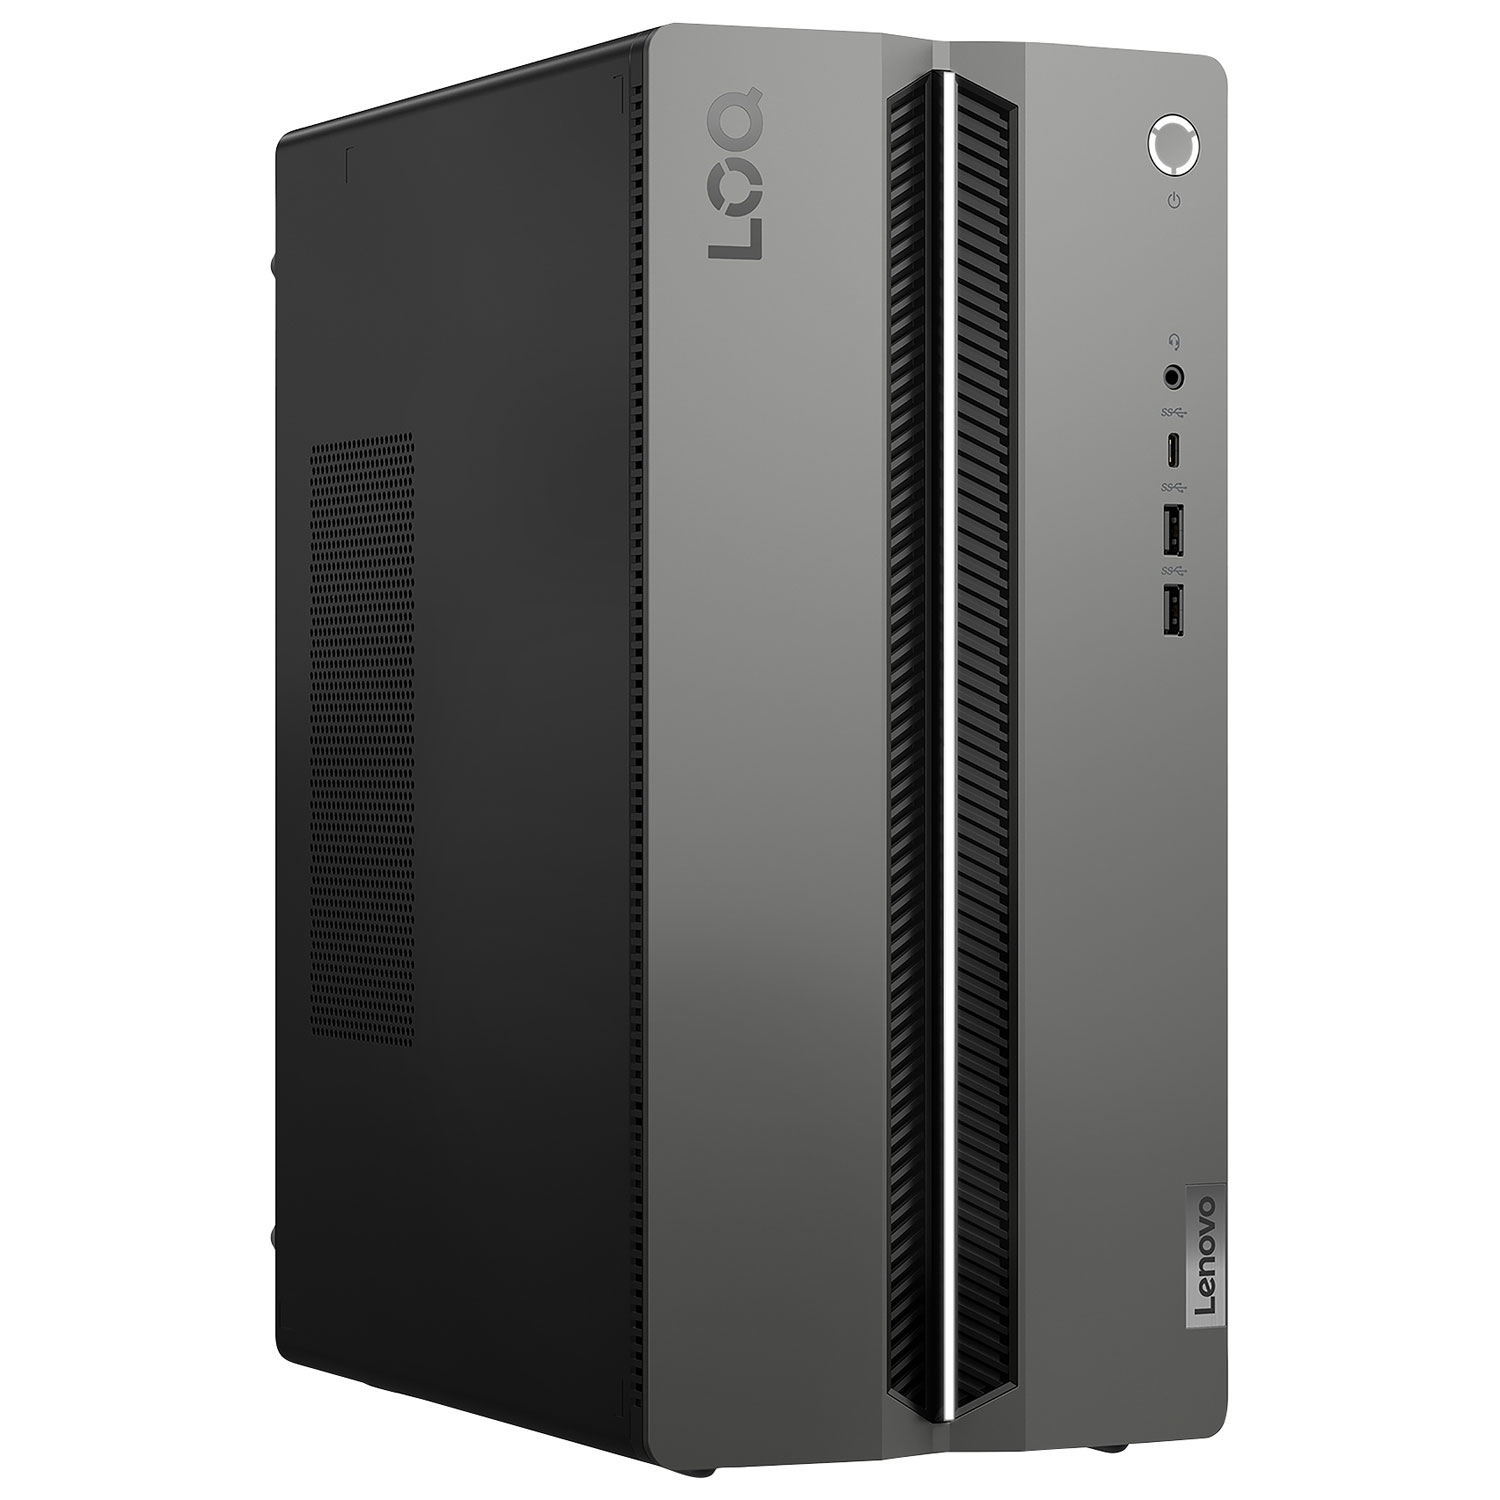 Lenovo LOQ Gaming PC (Intel Core i7 14700F/16GB RAM/1TB SSD/GeForce RTX 4060/Win 11) - Only at Best Buy